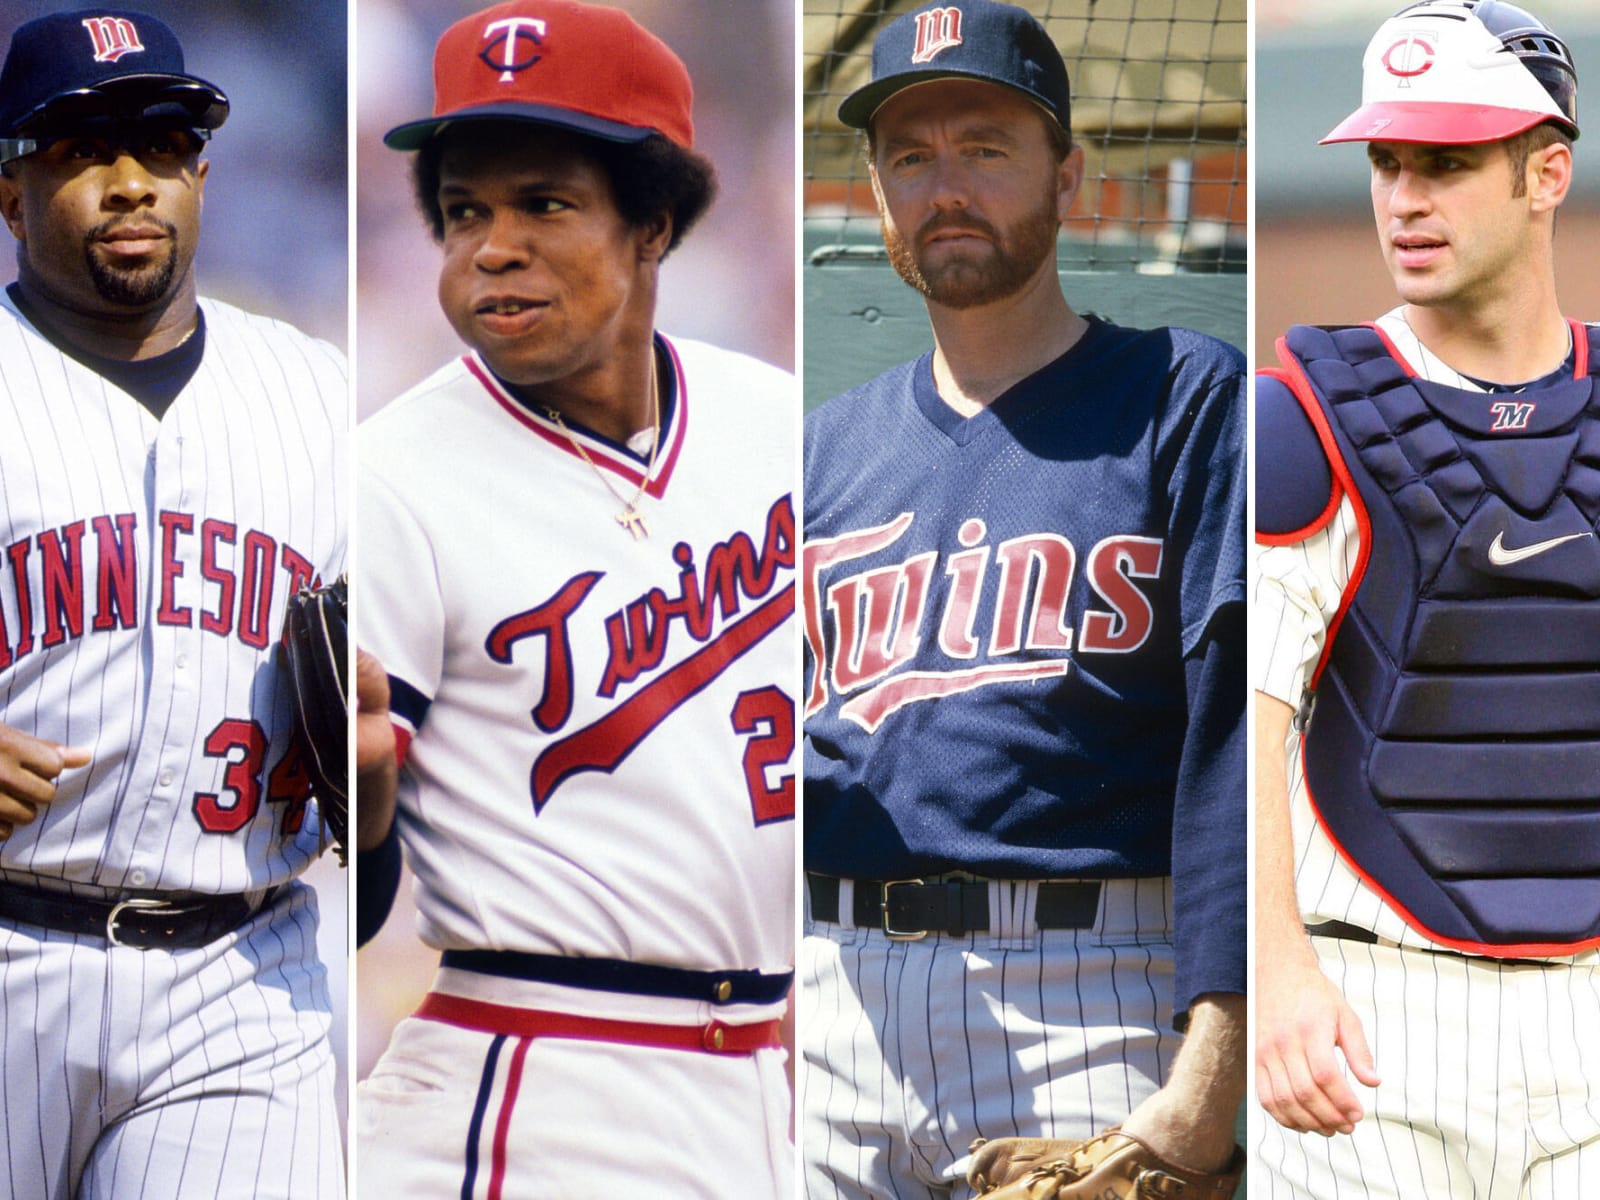 July 21 - This Day in Twins History 